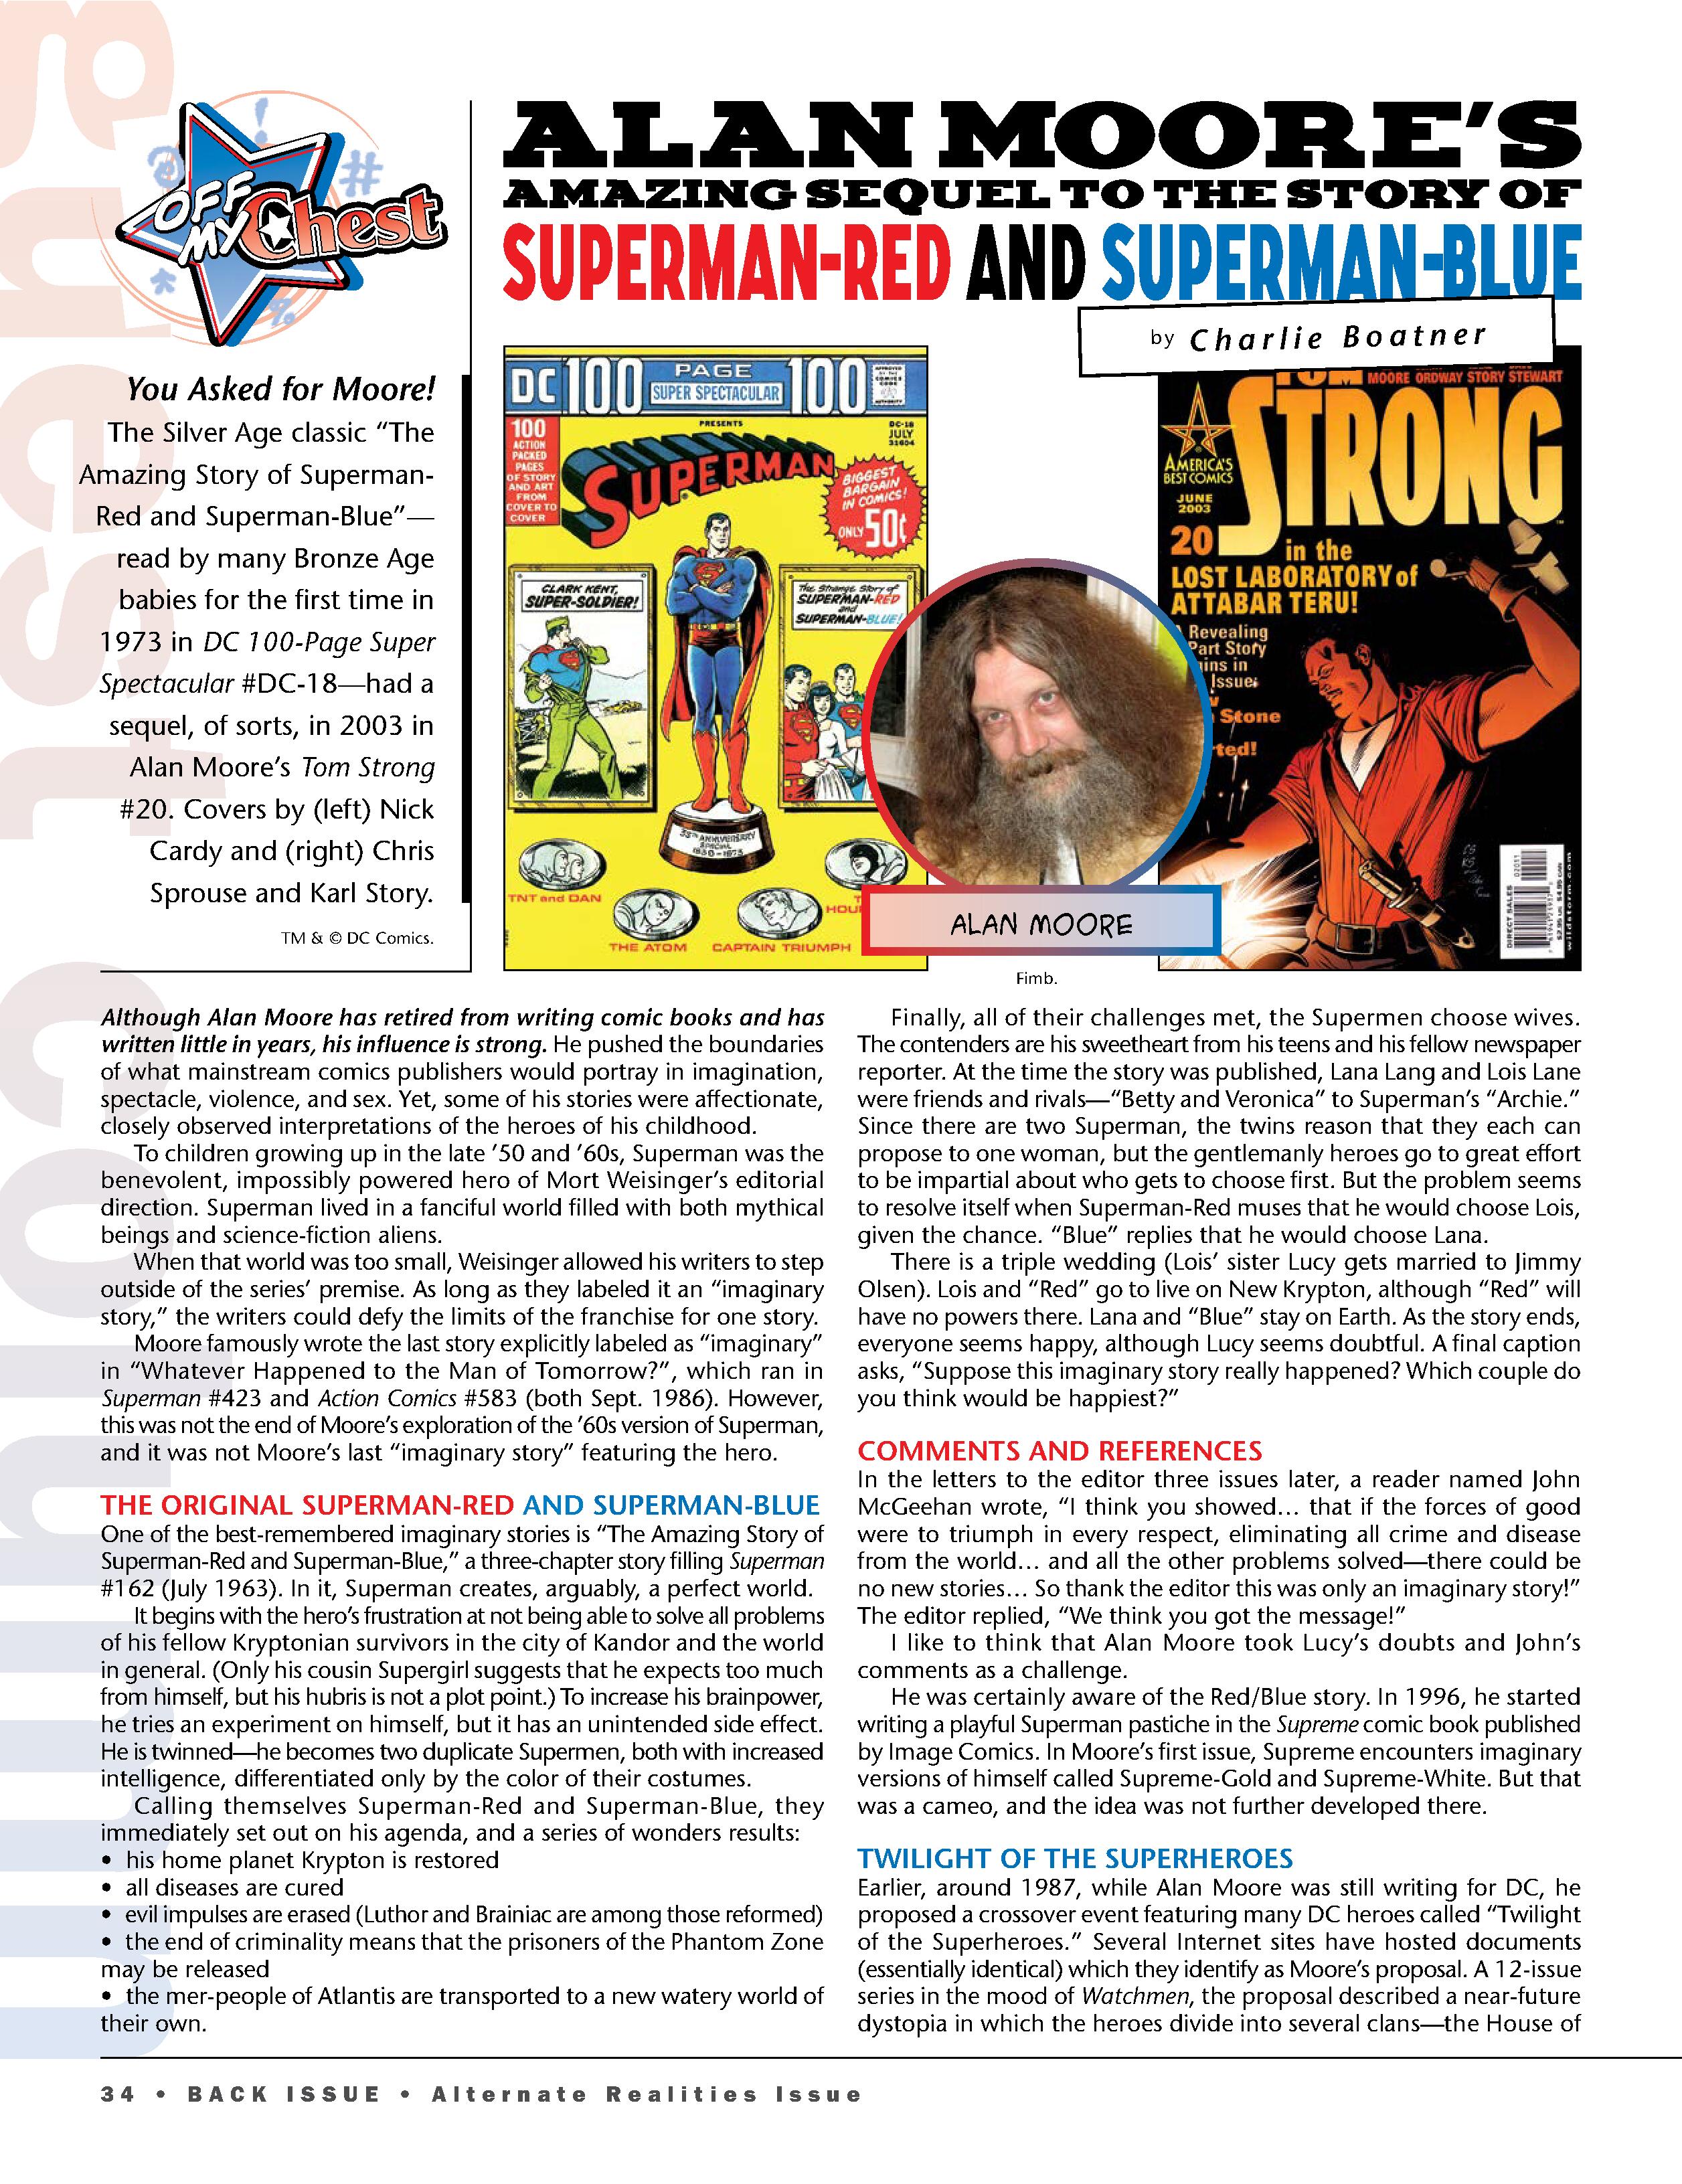 Read online Back Issue comic -  Issue #111 - 36